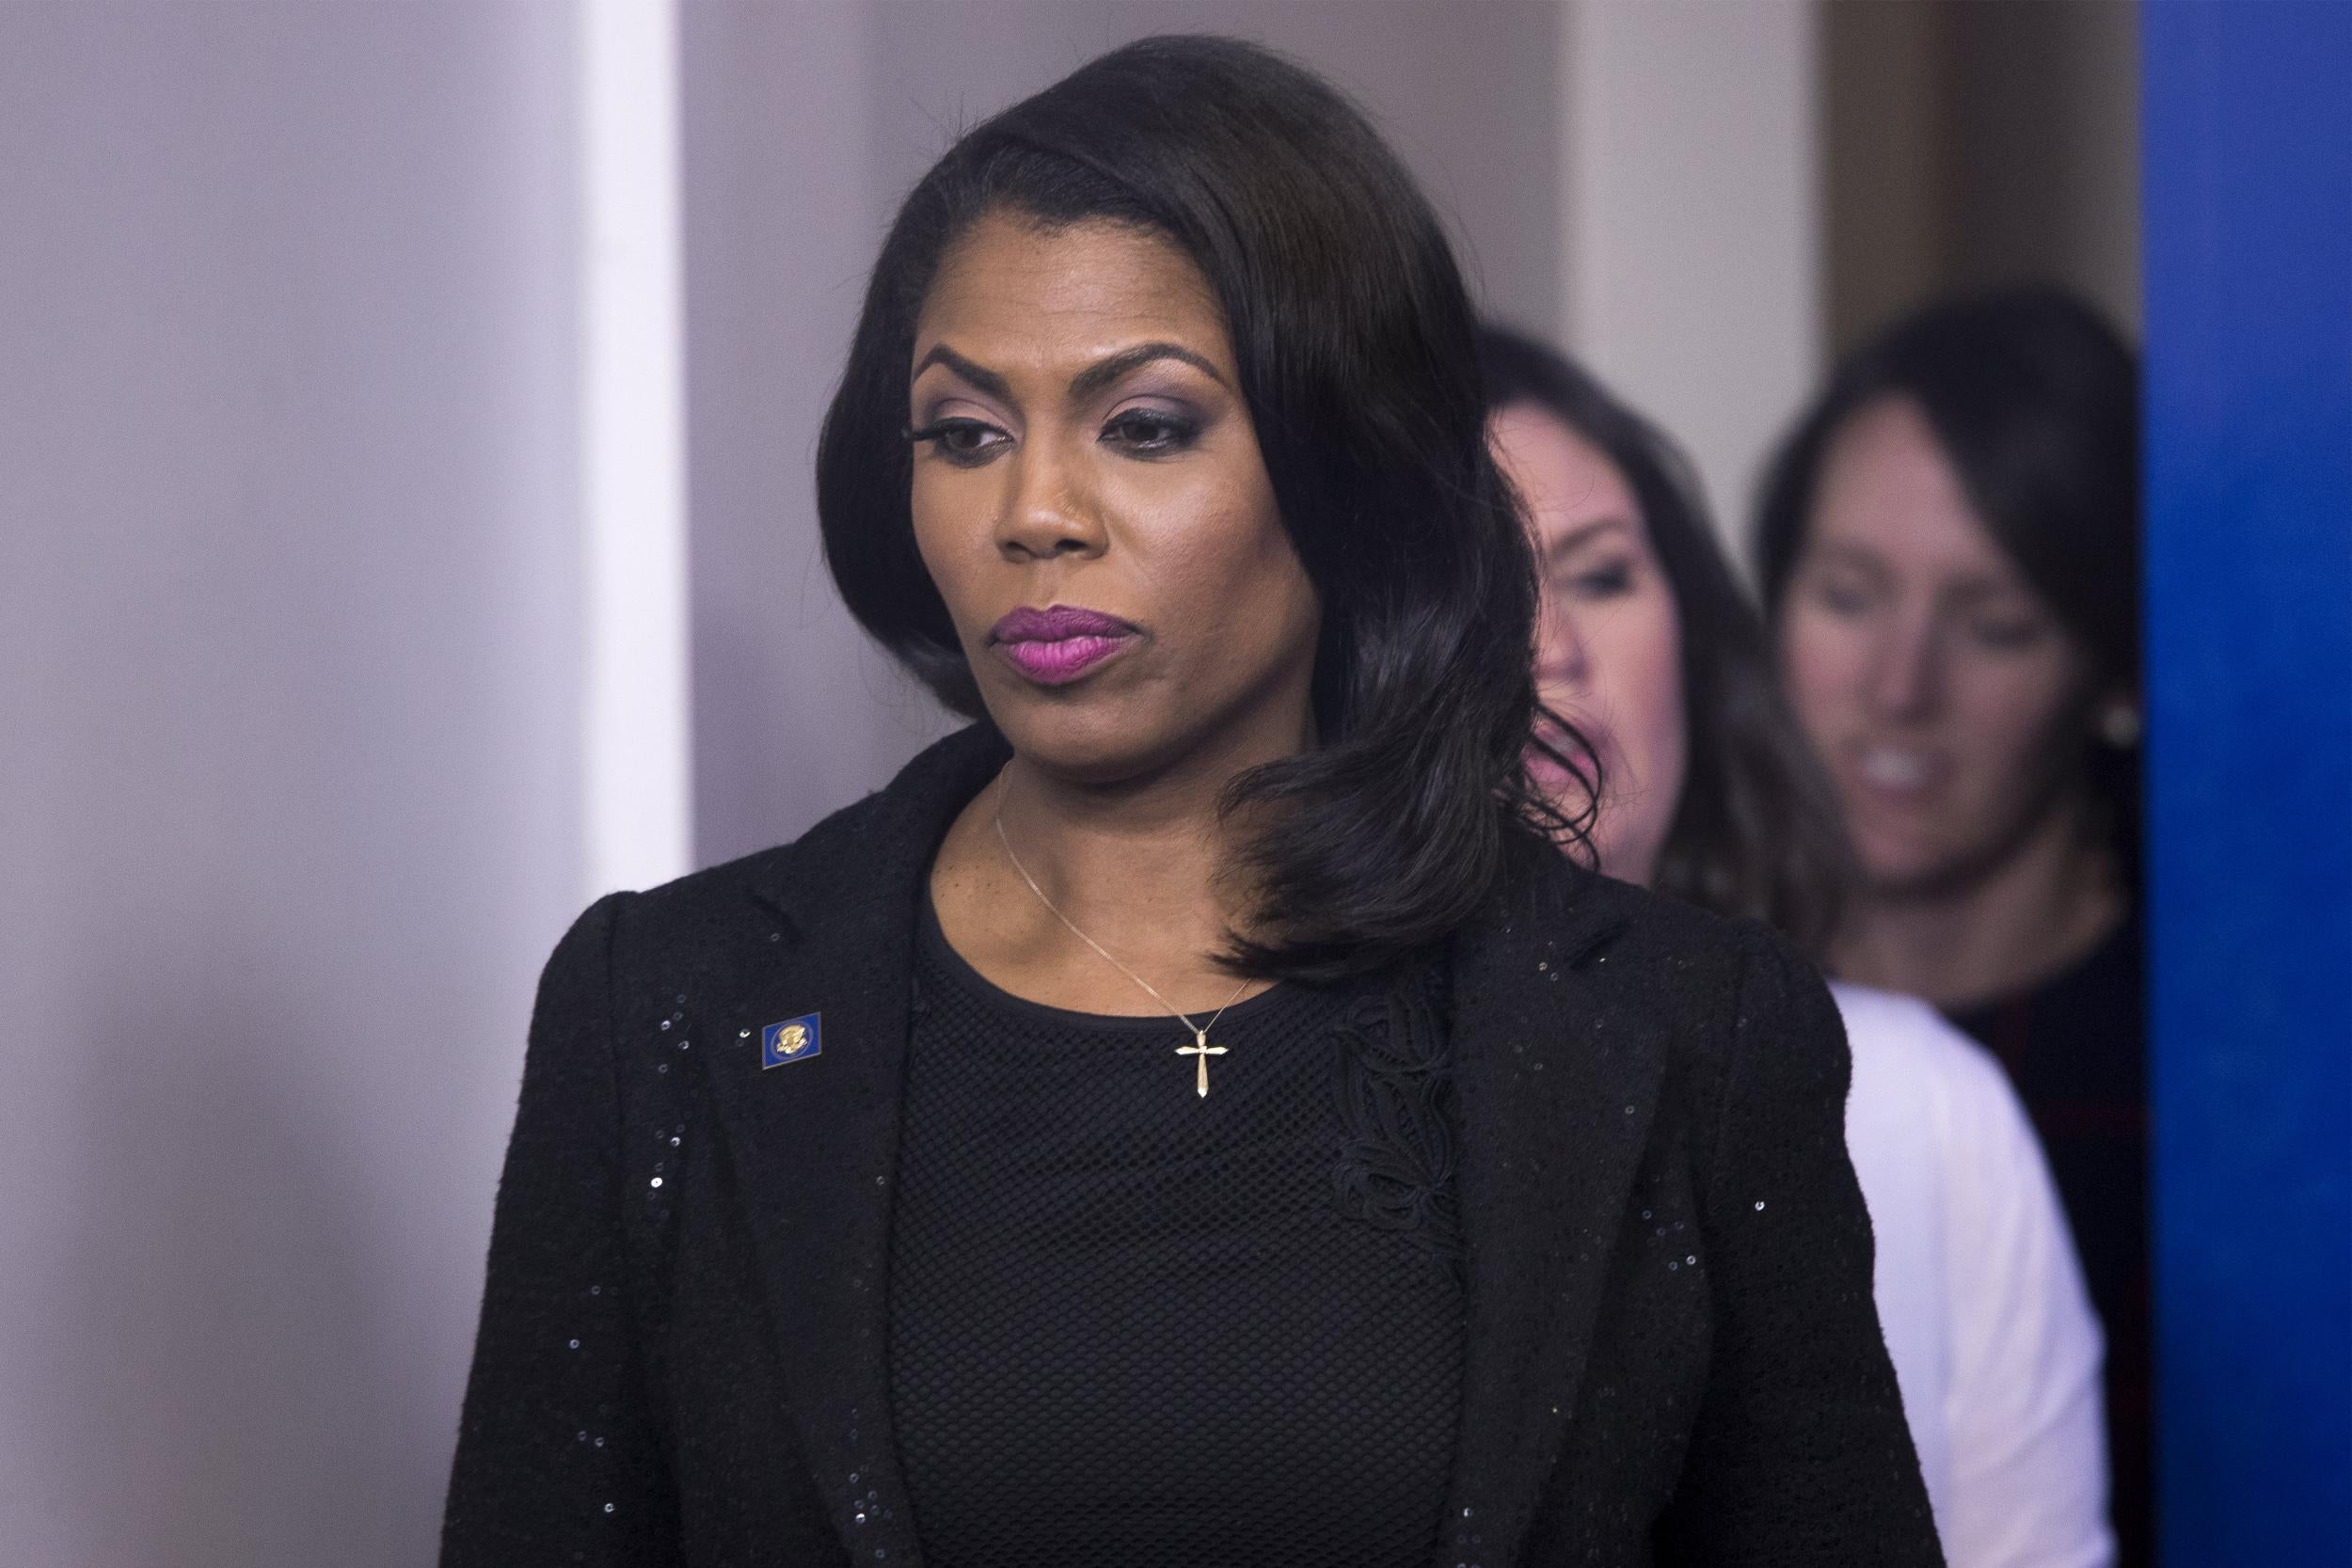 Omarosa Manigault Newman is to leave her role at the White House